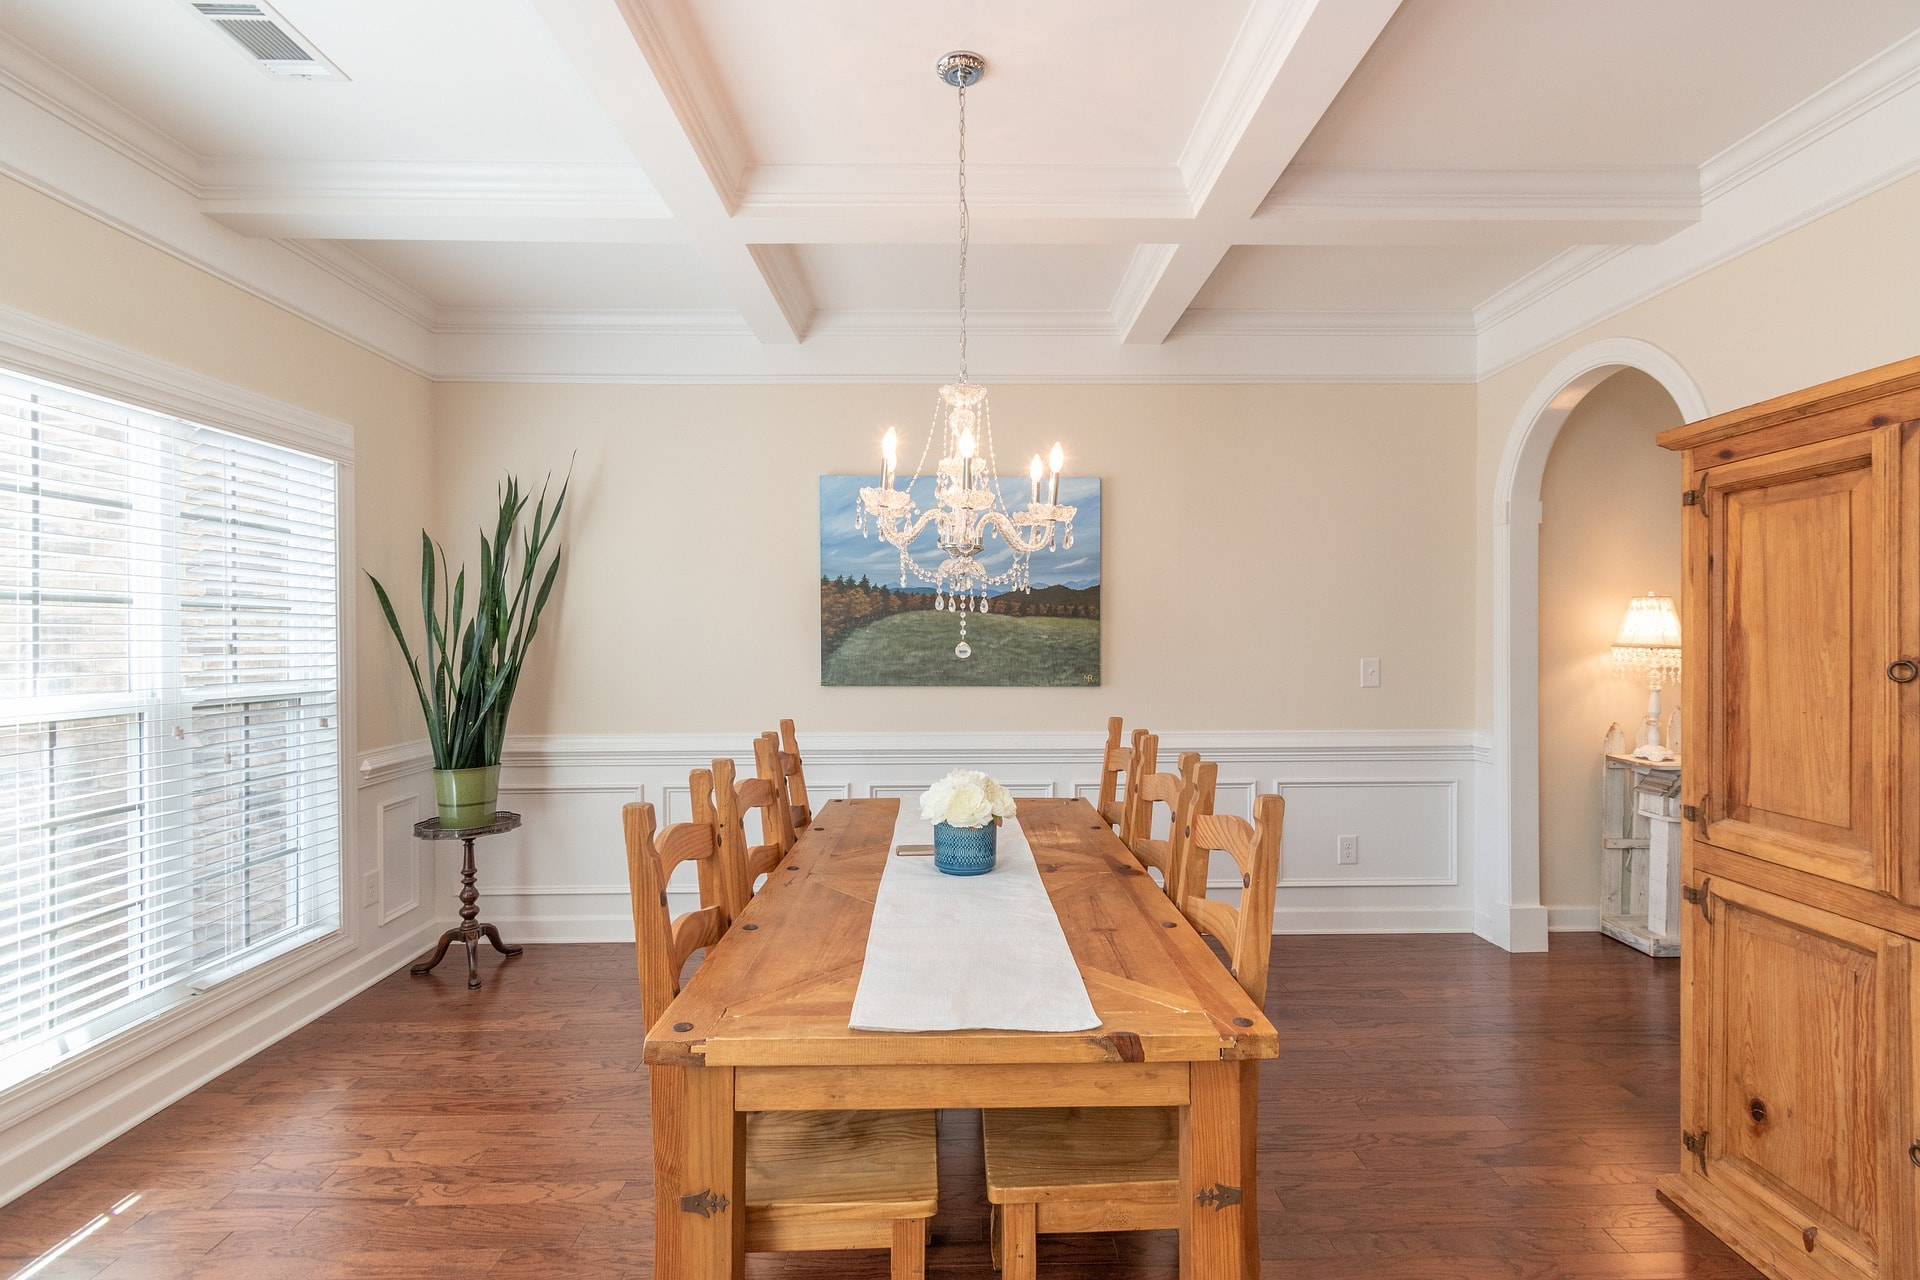 An image of a beautiful wooden dining table with wooden chairs and wonderful ceiling lamp